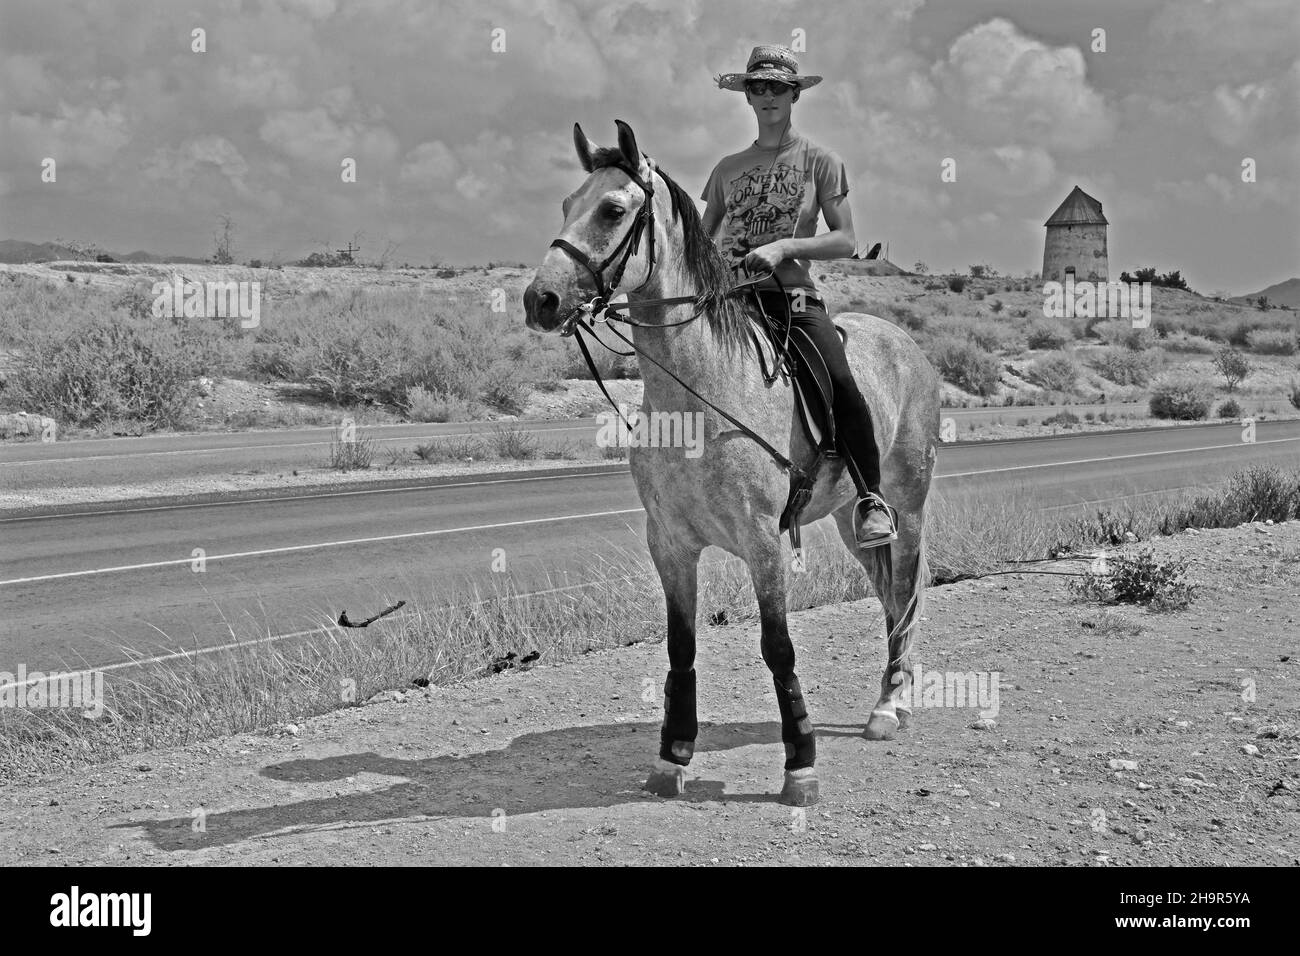 Lonely rider at the roadside with windmill in the background, rider with straw hat and sunglasses, horseback riding, standing horse with rider, man Stock Photo